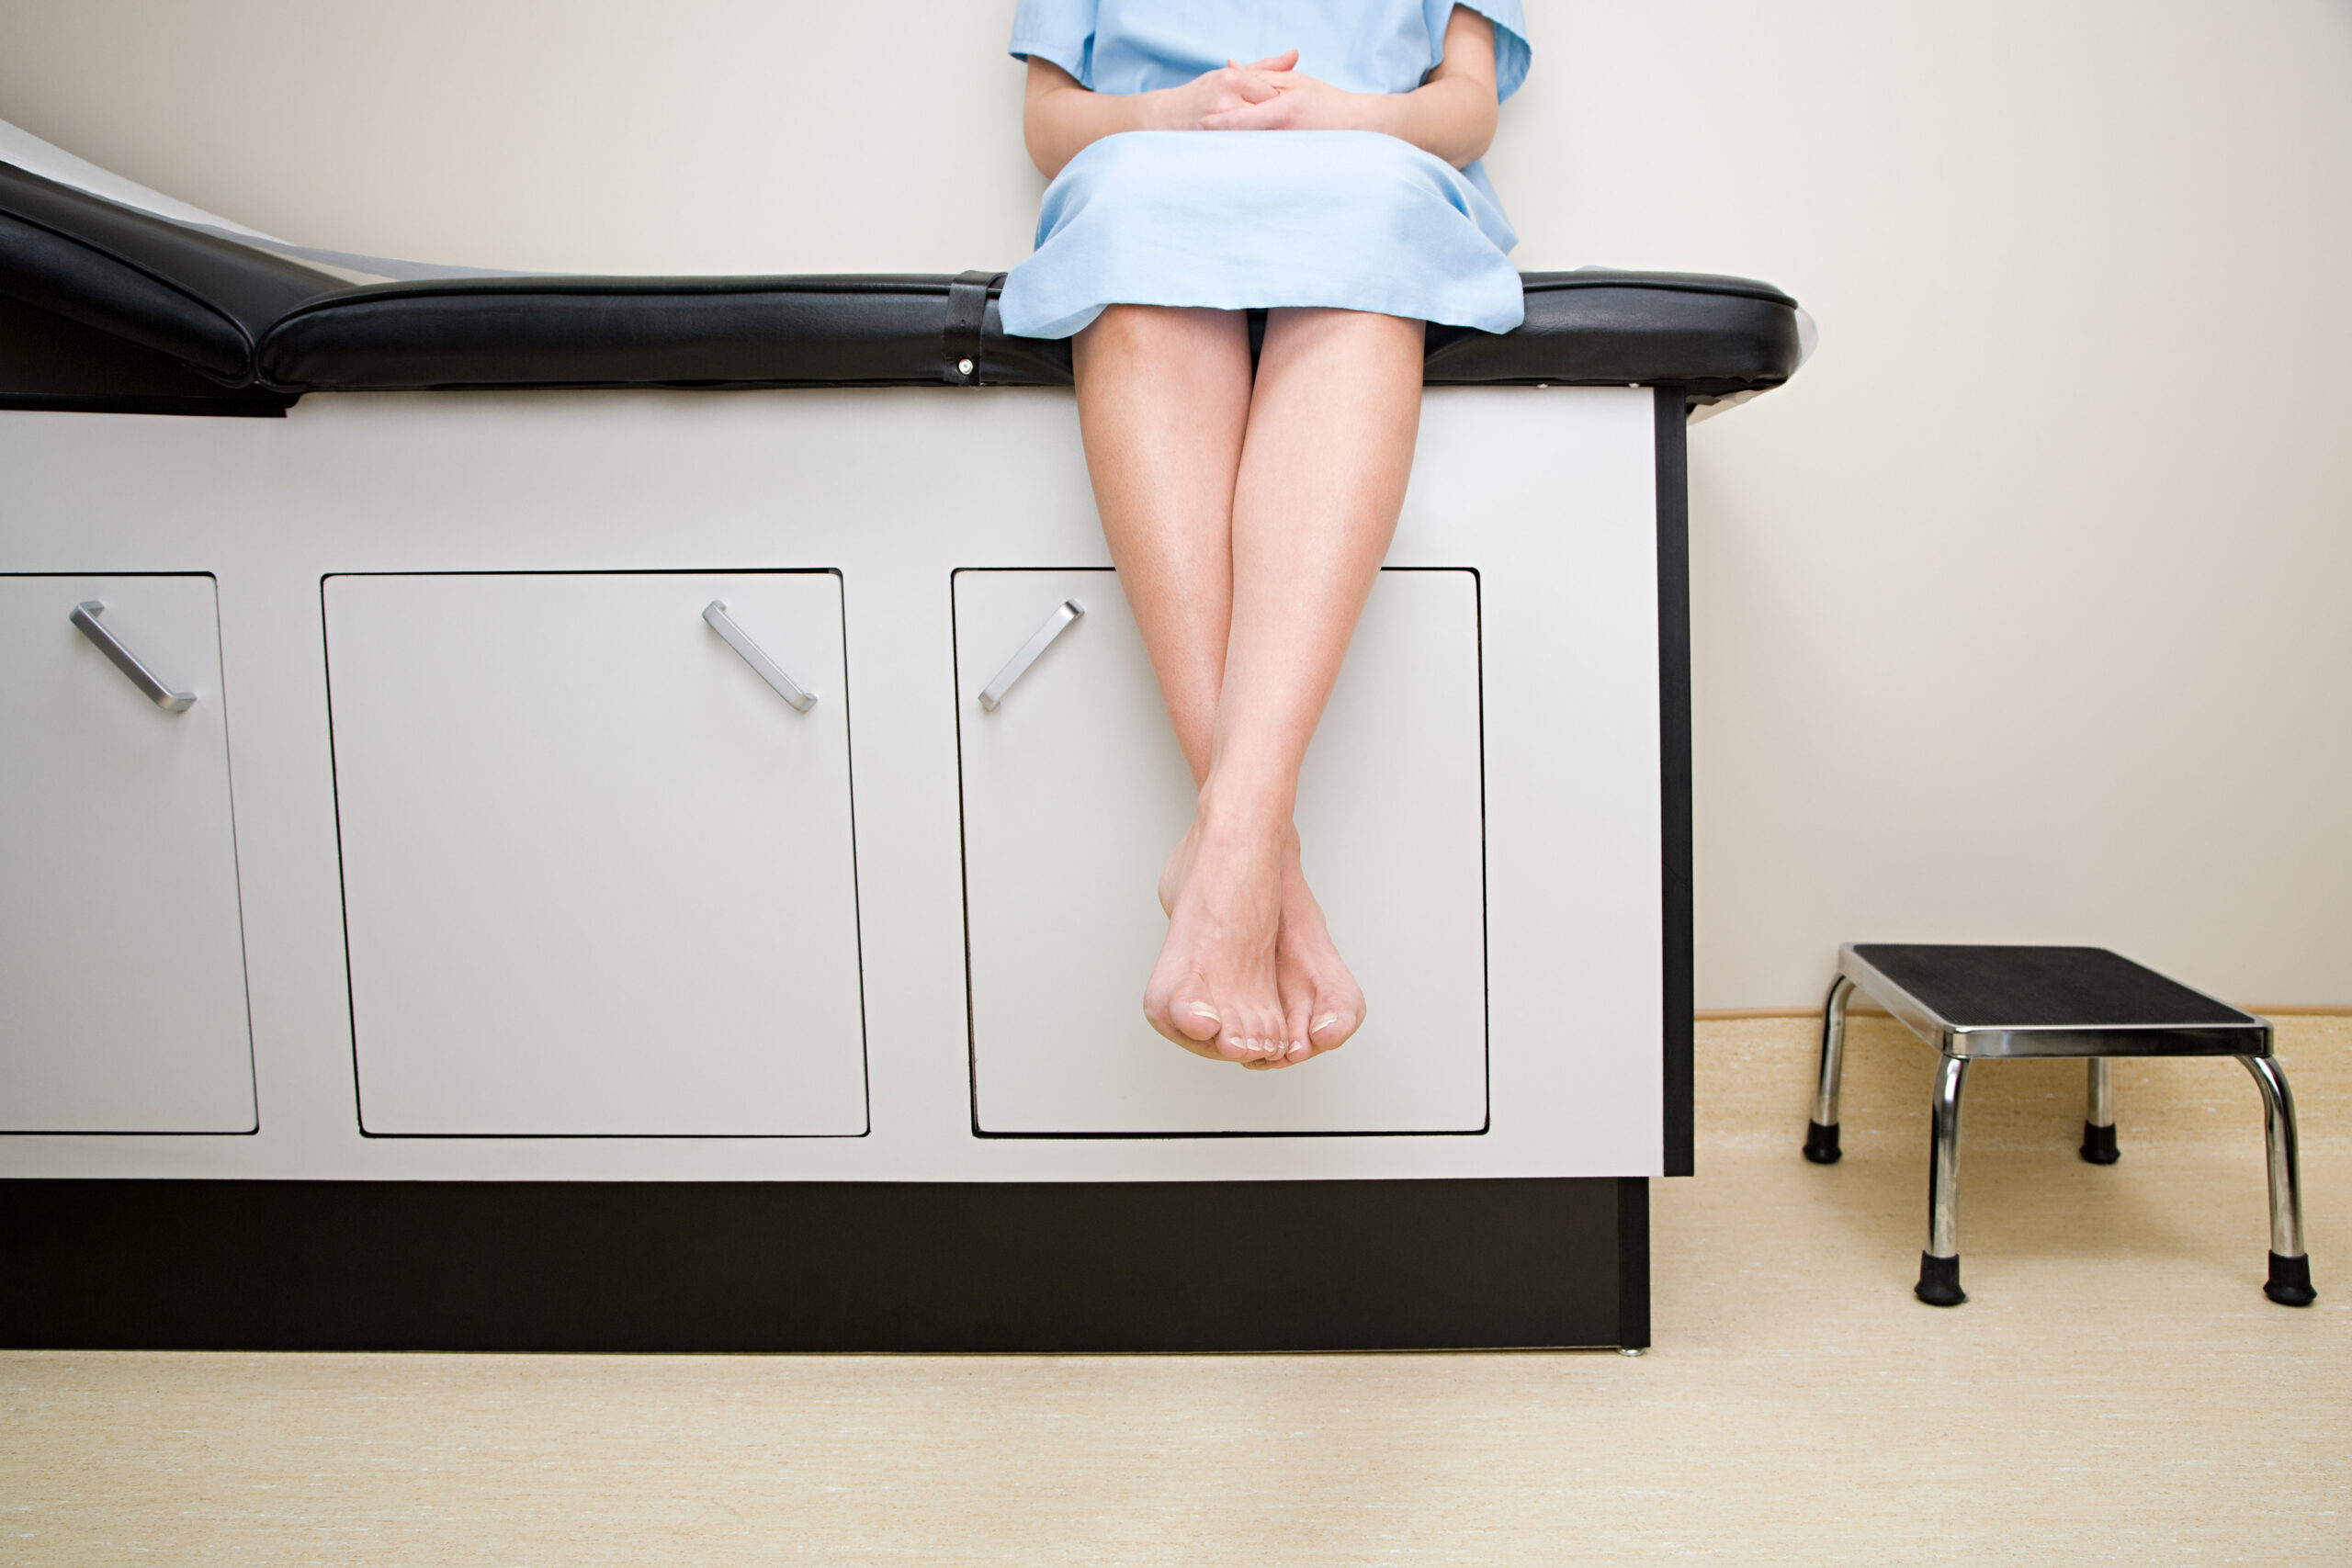 A woman with nervous legs syndrome awaiting diagnosis in a doctor's office.